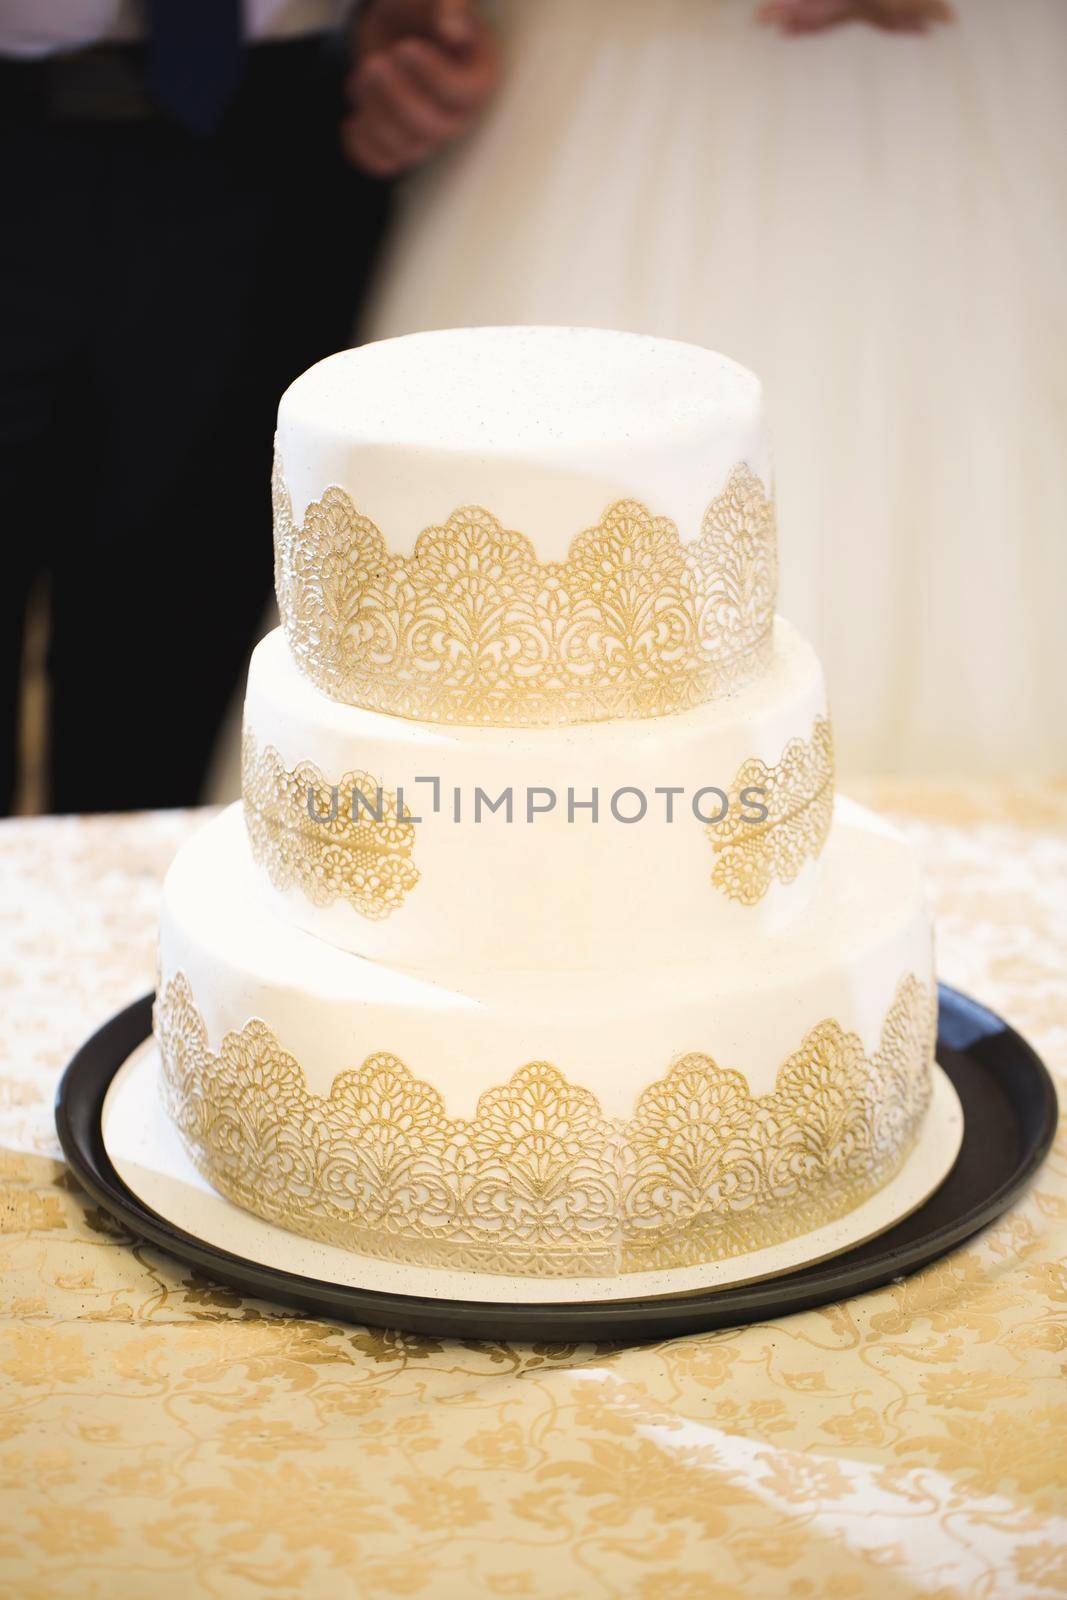 Beautiful wedding cake for the newlyweds at the wedding. A birthday cake at a banquet by StudioPeace